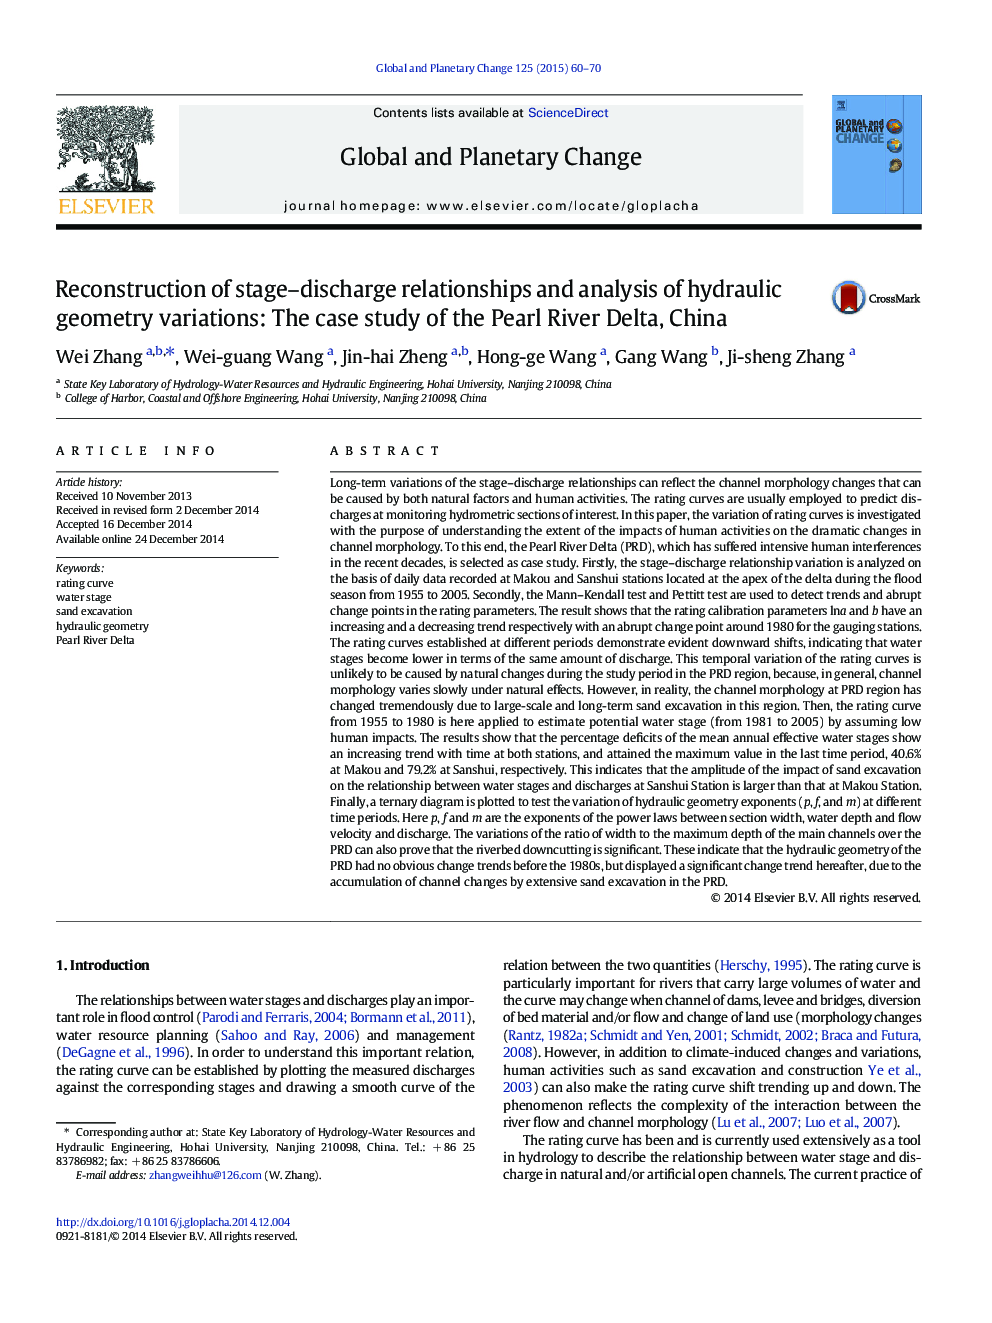 Reconstruction of stage–discharge relationships and analysis of hydraulic geometry variations: The case study of the Pearl River Delta, China